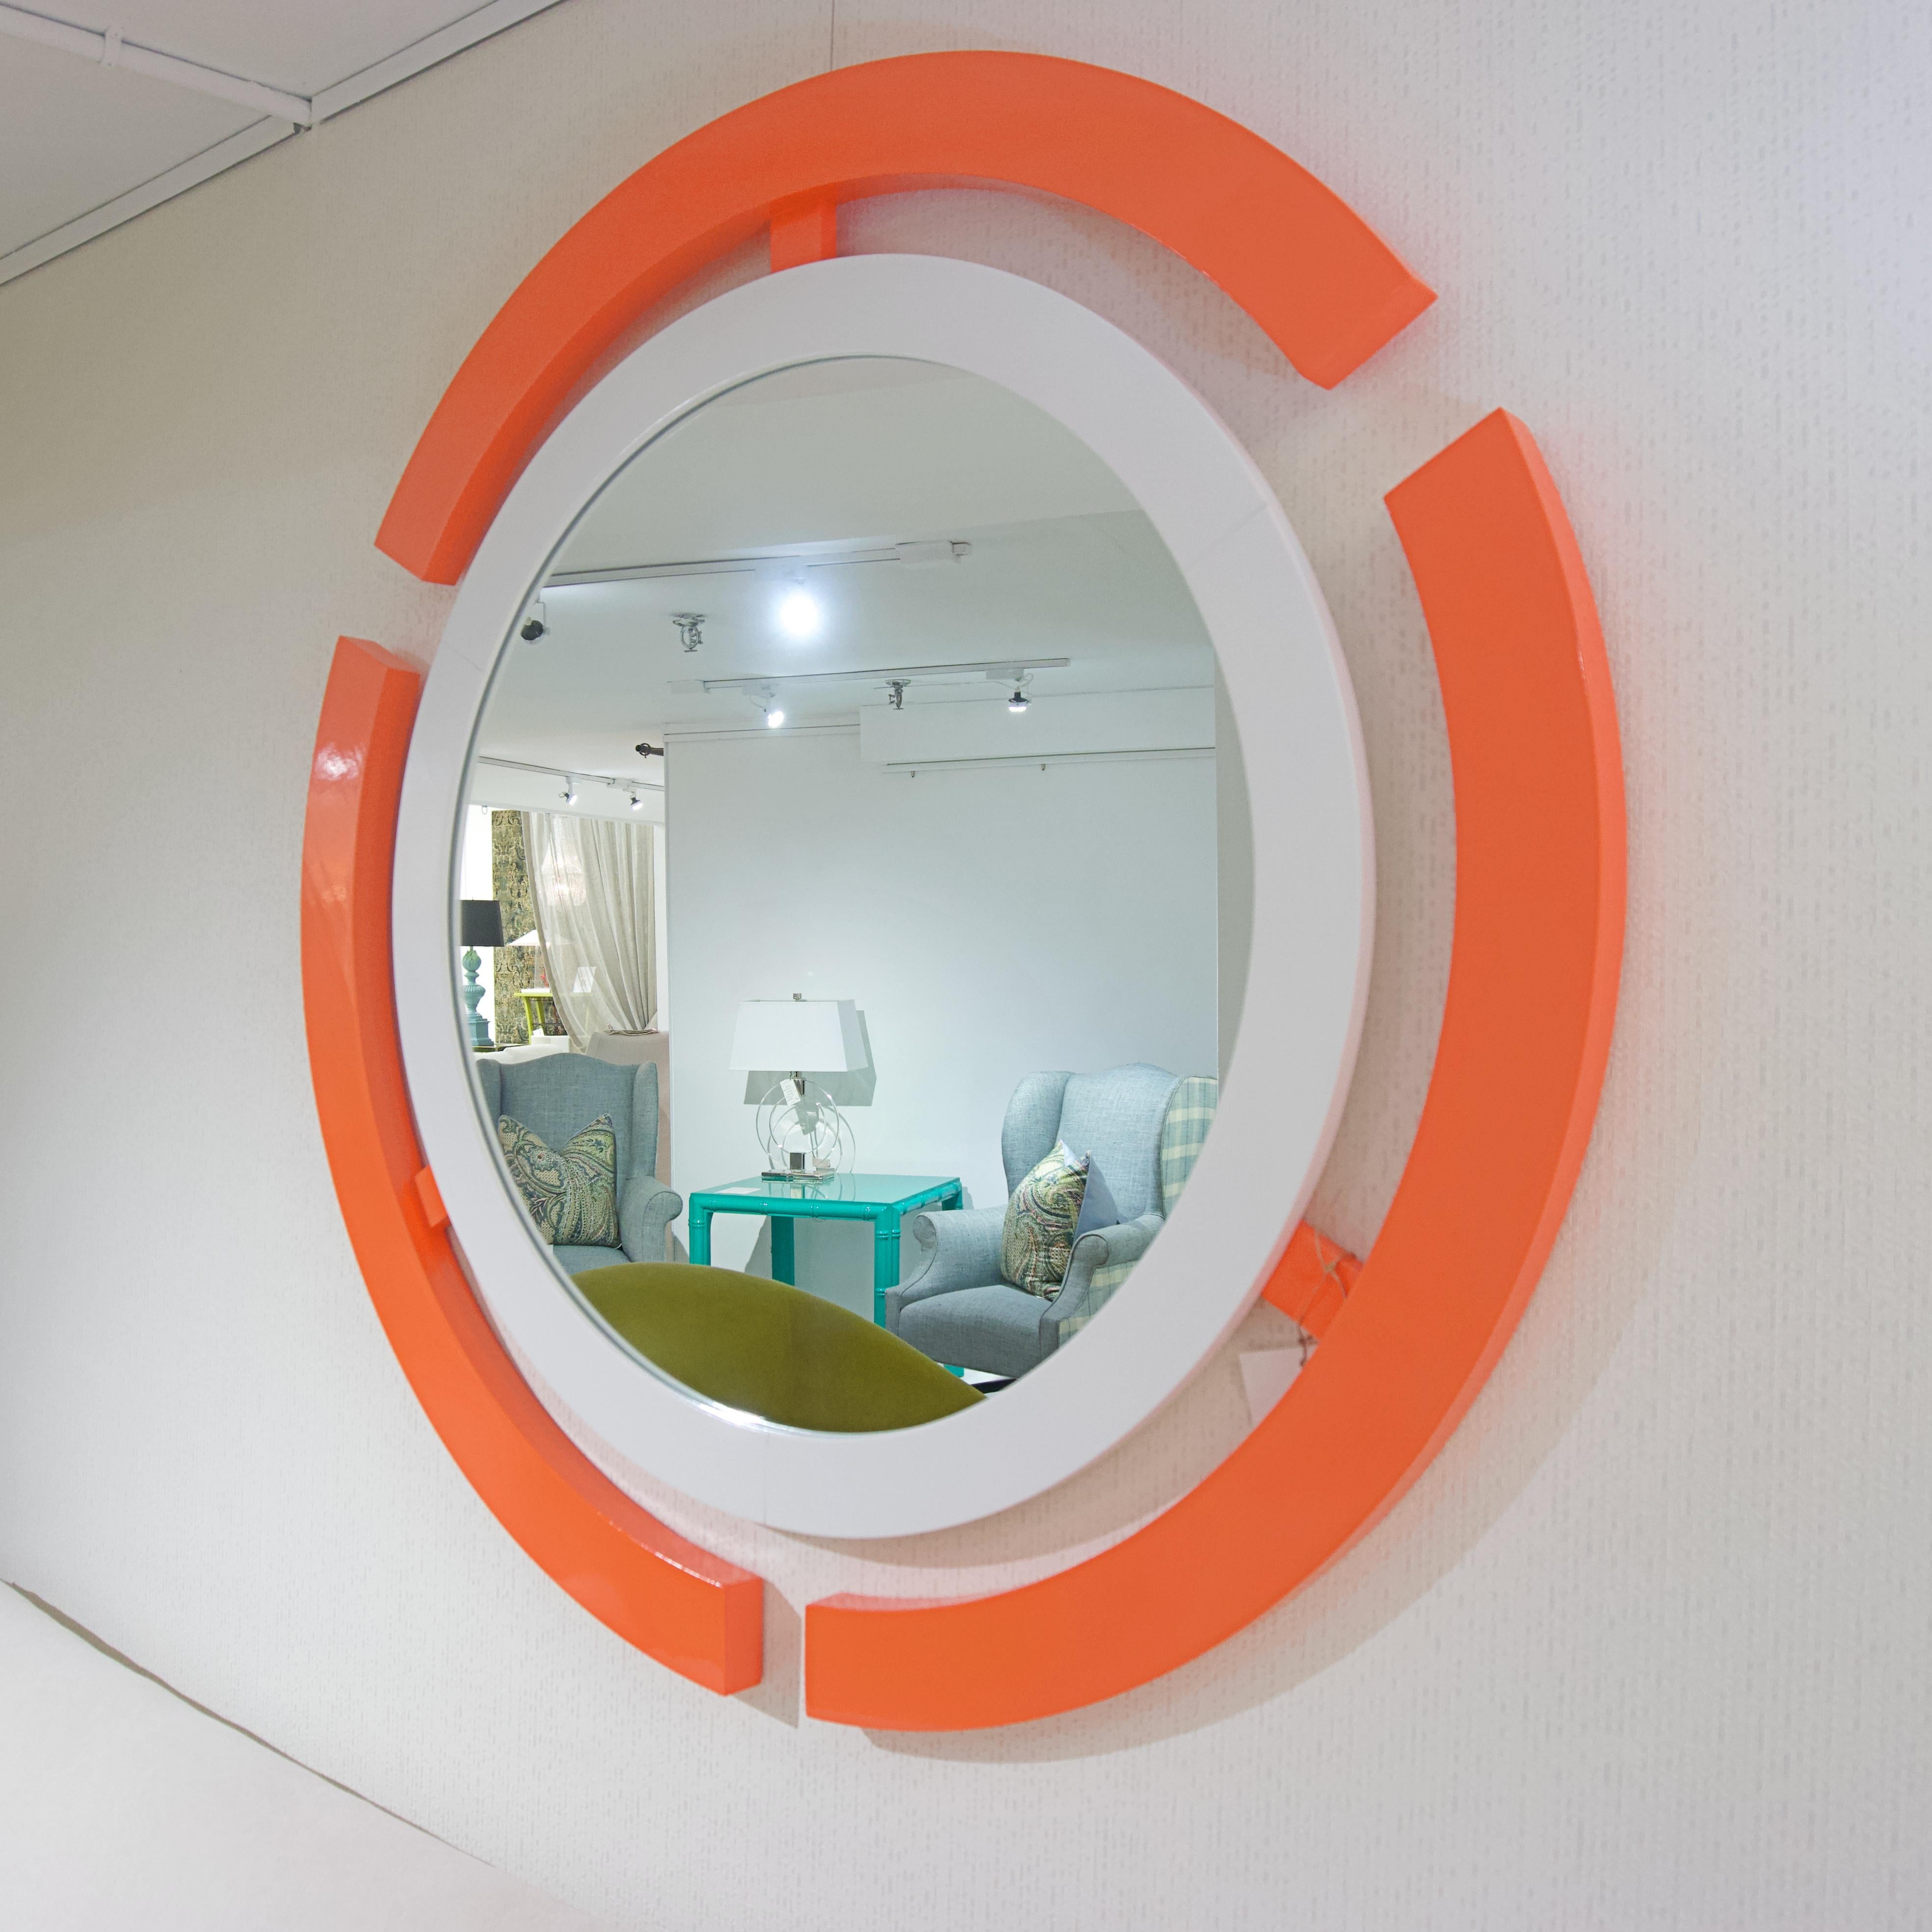 Customize this mirror with any color or buy as is in orange and white lacquer. Inspired by sci-films. Made with poplar wood and marine lacquer. 

Dimensions: 43” round.